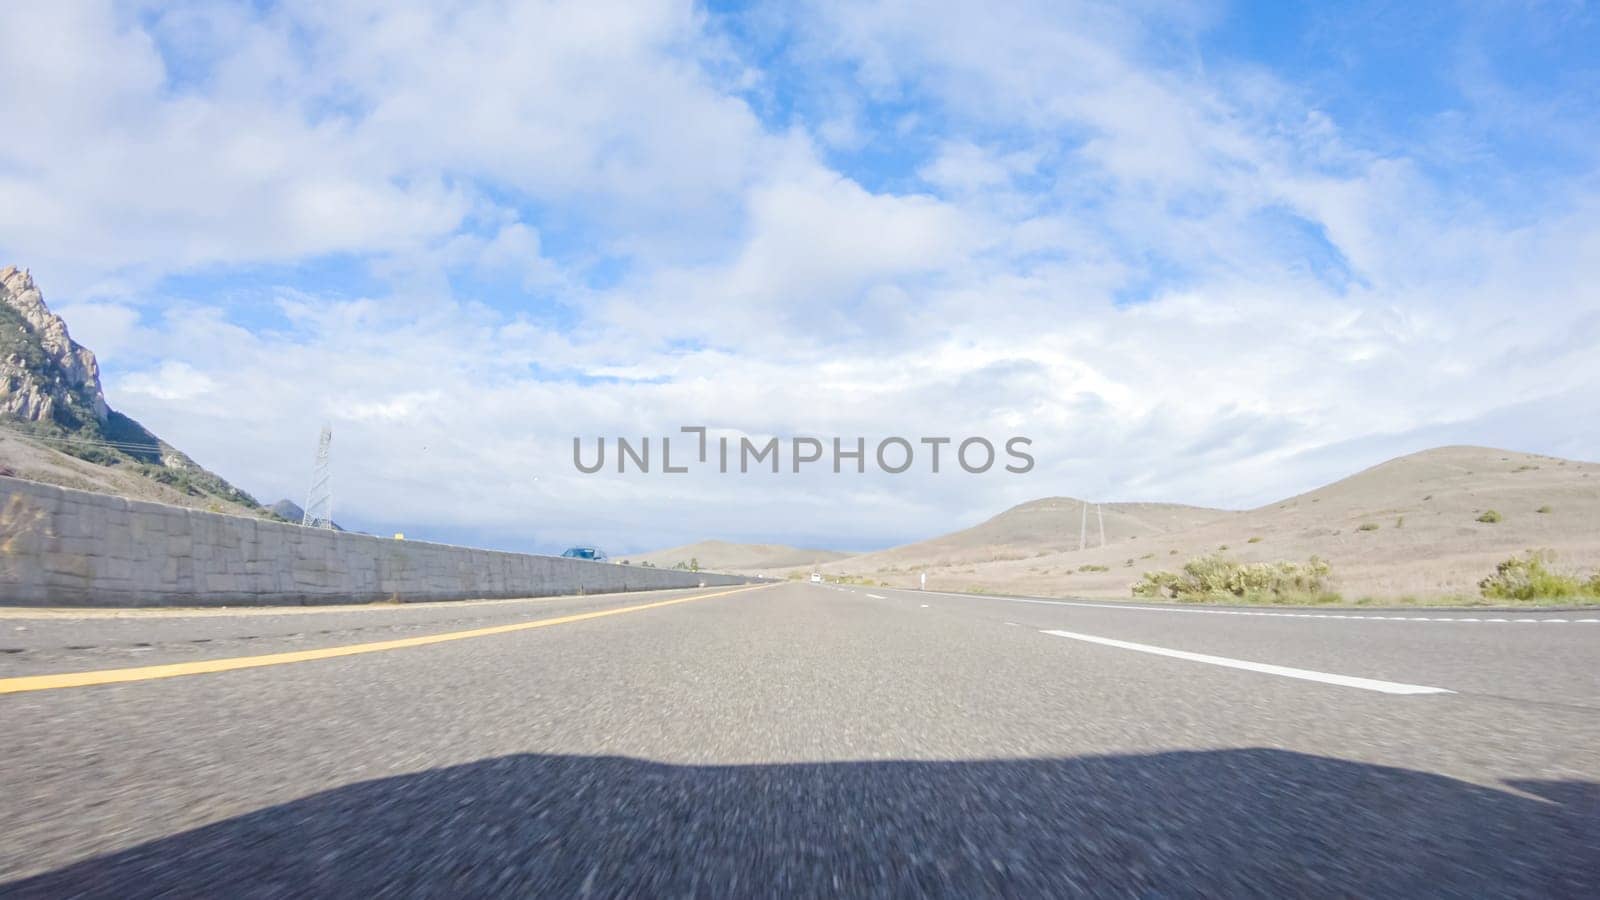 On a crisp winter day, a car cruises along the iconic Highway 101 near San Luis Obispo, California. The surrounding landscape is brownish and subdued, with rolling hills and patches of coastal vegetation flanking the winding road.